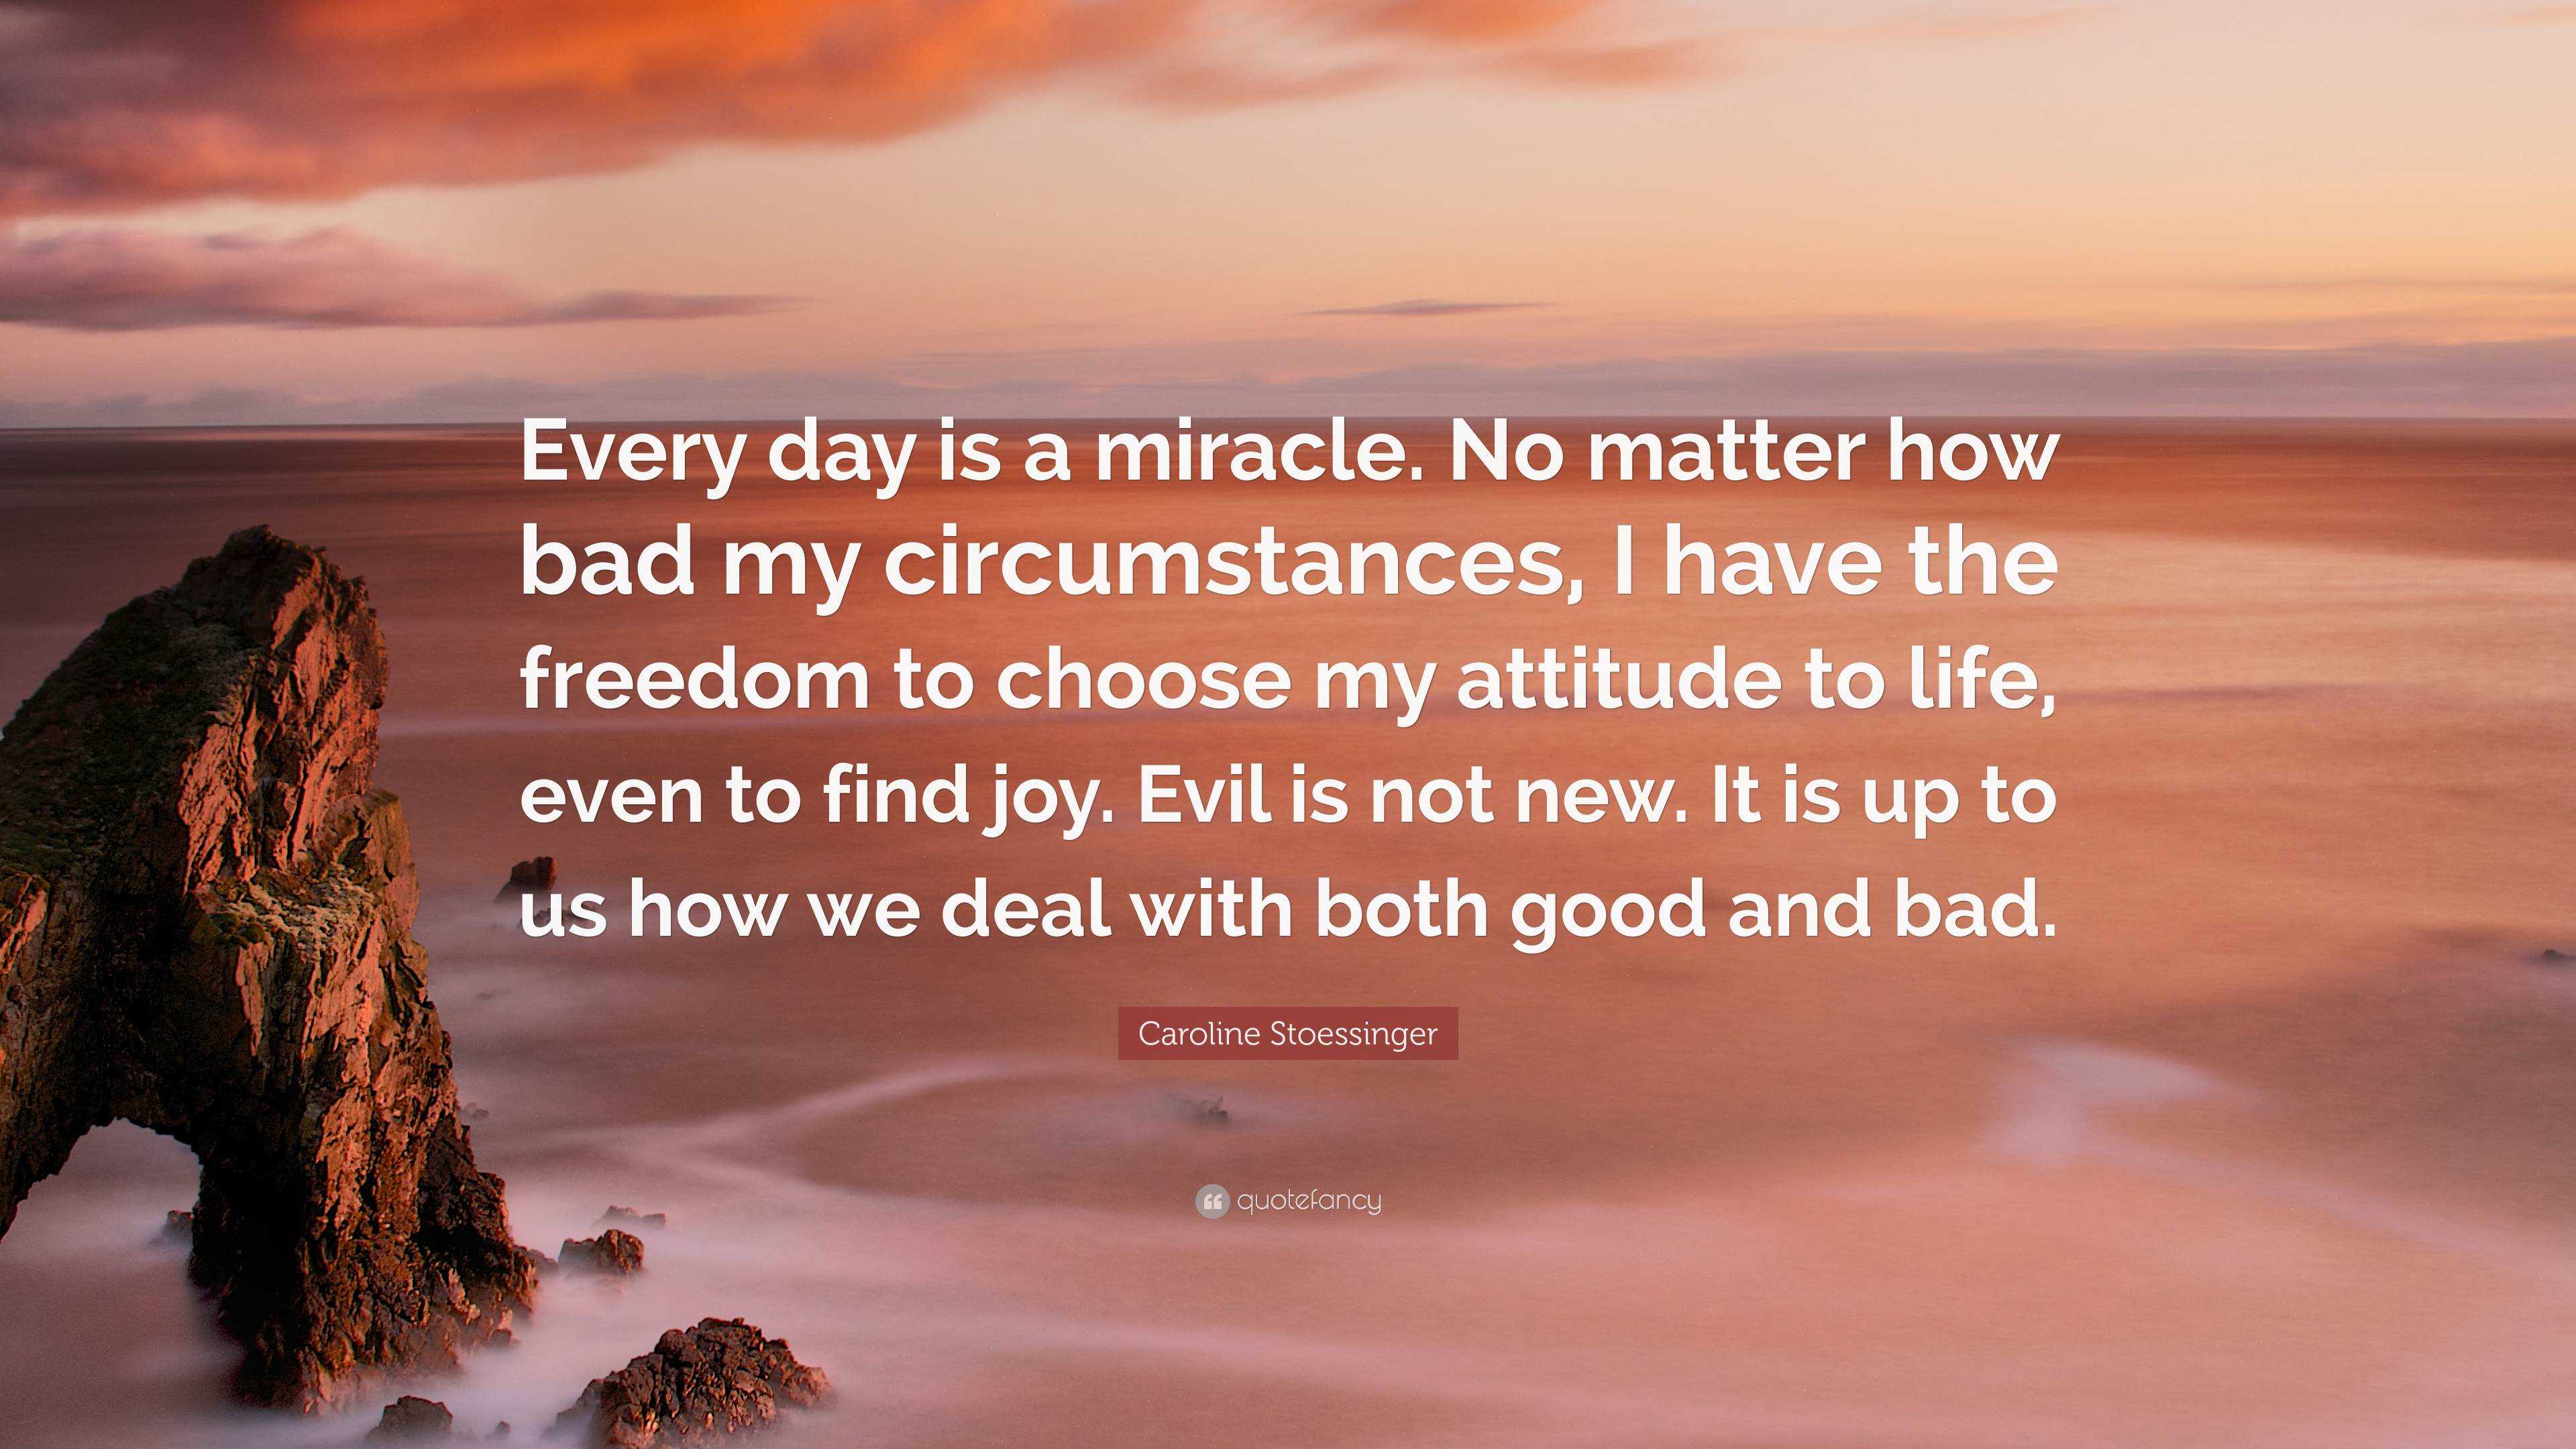 An Everyday Miracle 2, quotes